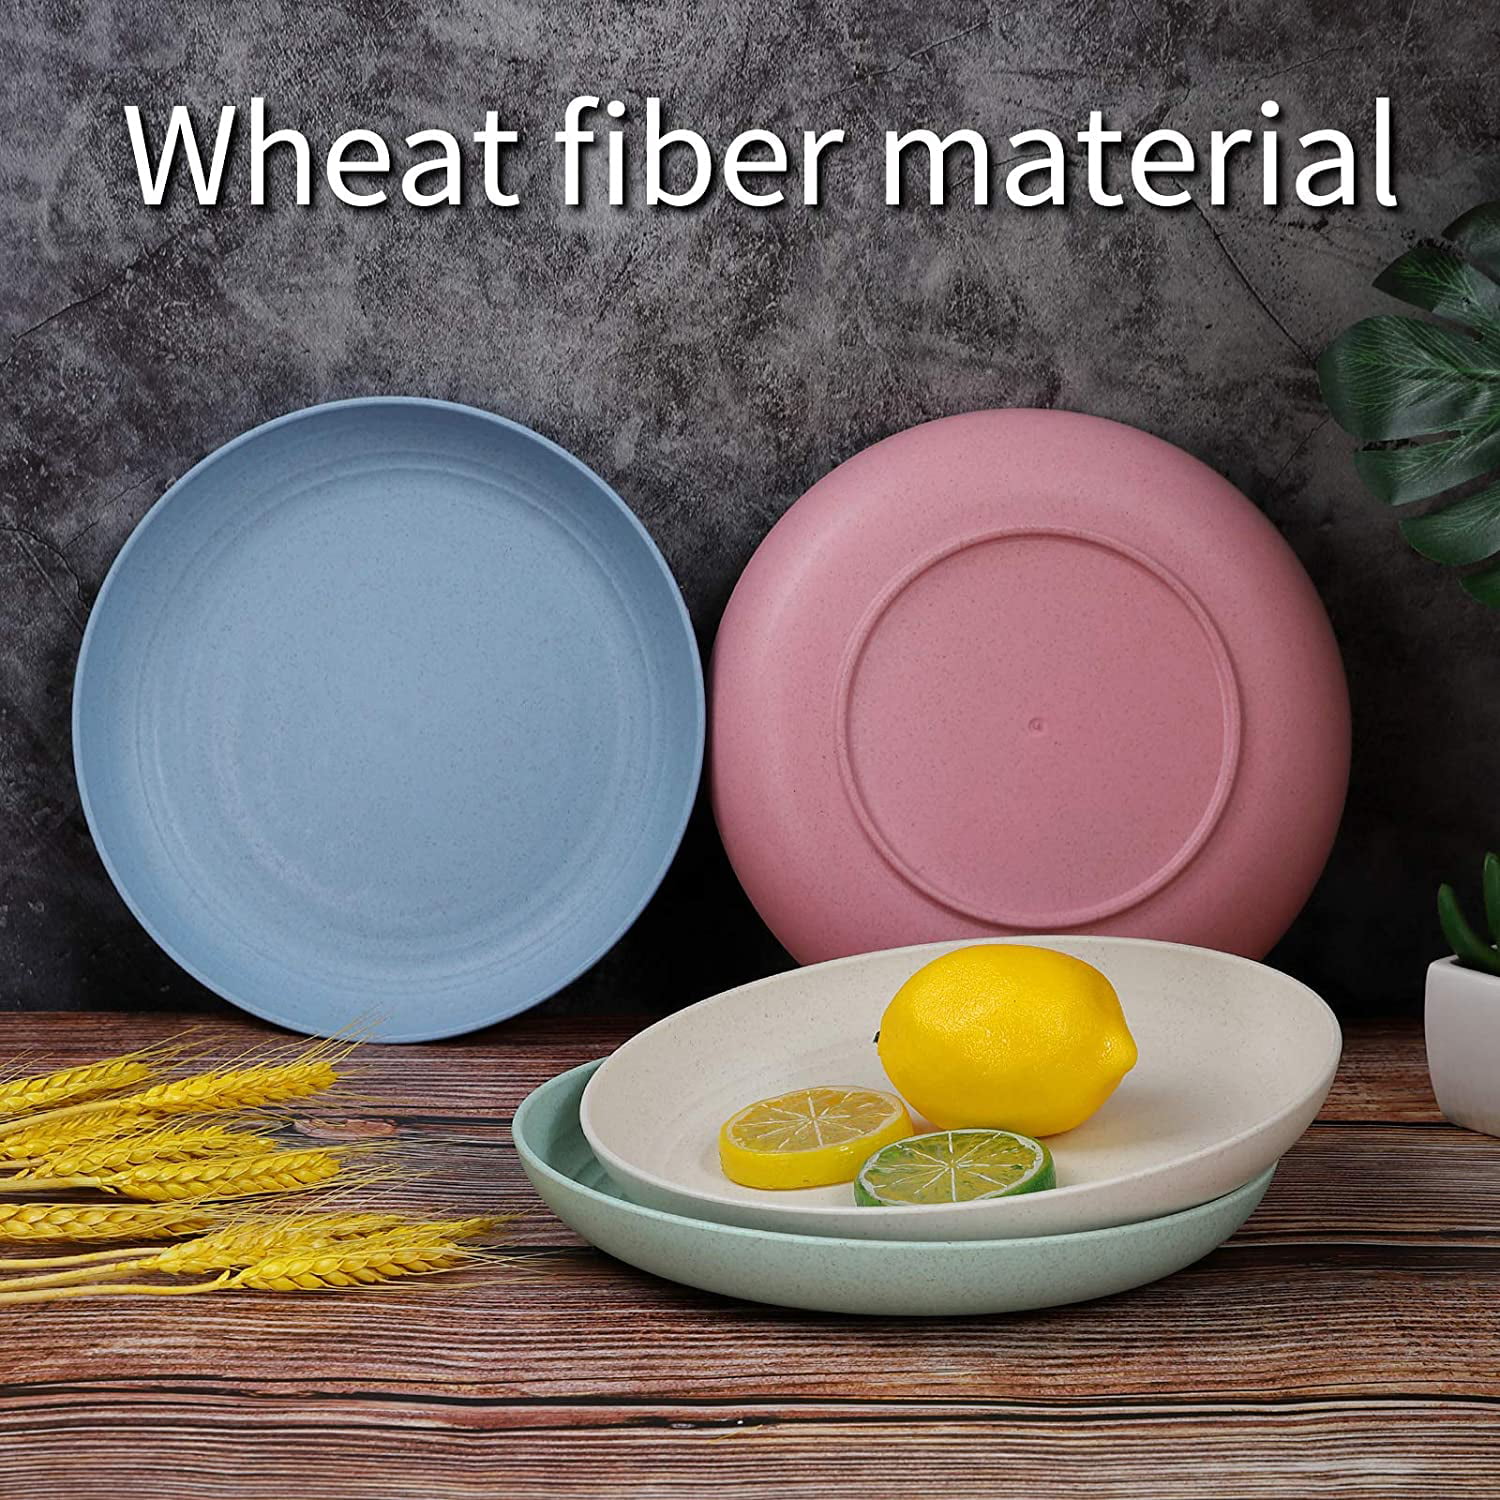 Cereal Bowls Multi Color-Unbreakable Microwave Safe-Lightweight Bowls Cups Eco Friendly,Dishwasher Safe,Wheat Straw Plates,Wheat Straw Bowls Wheat Straw Dinnerware Sets 12pcs Plates Set-Reusable 